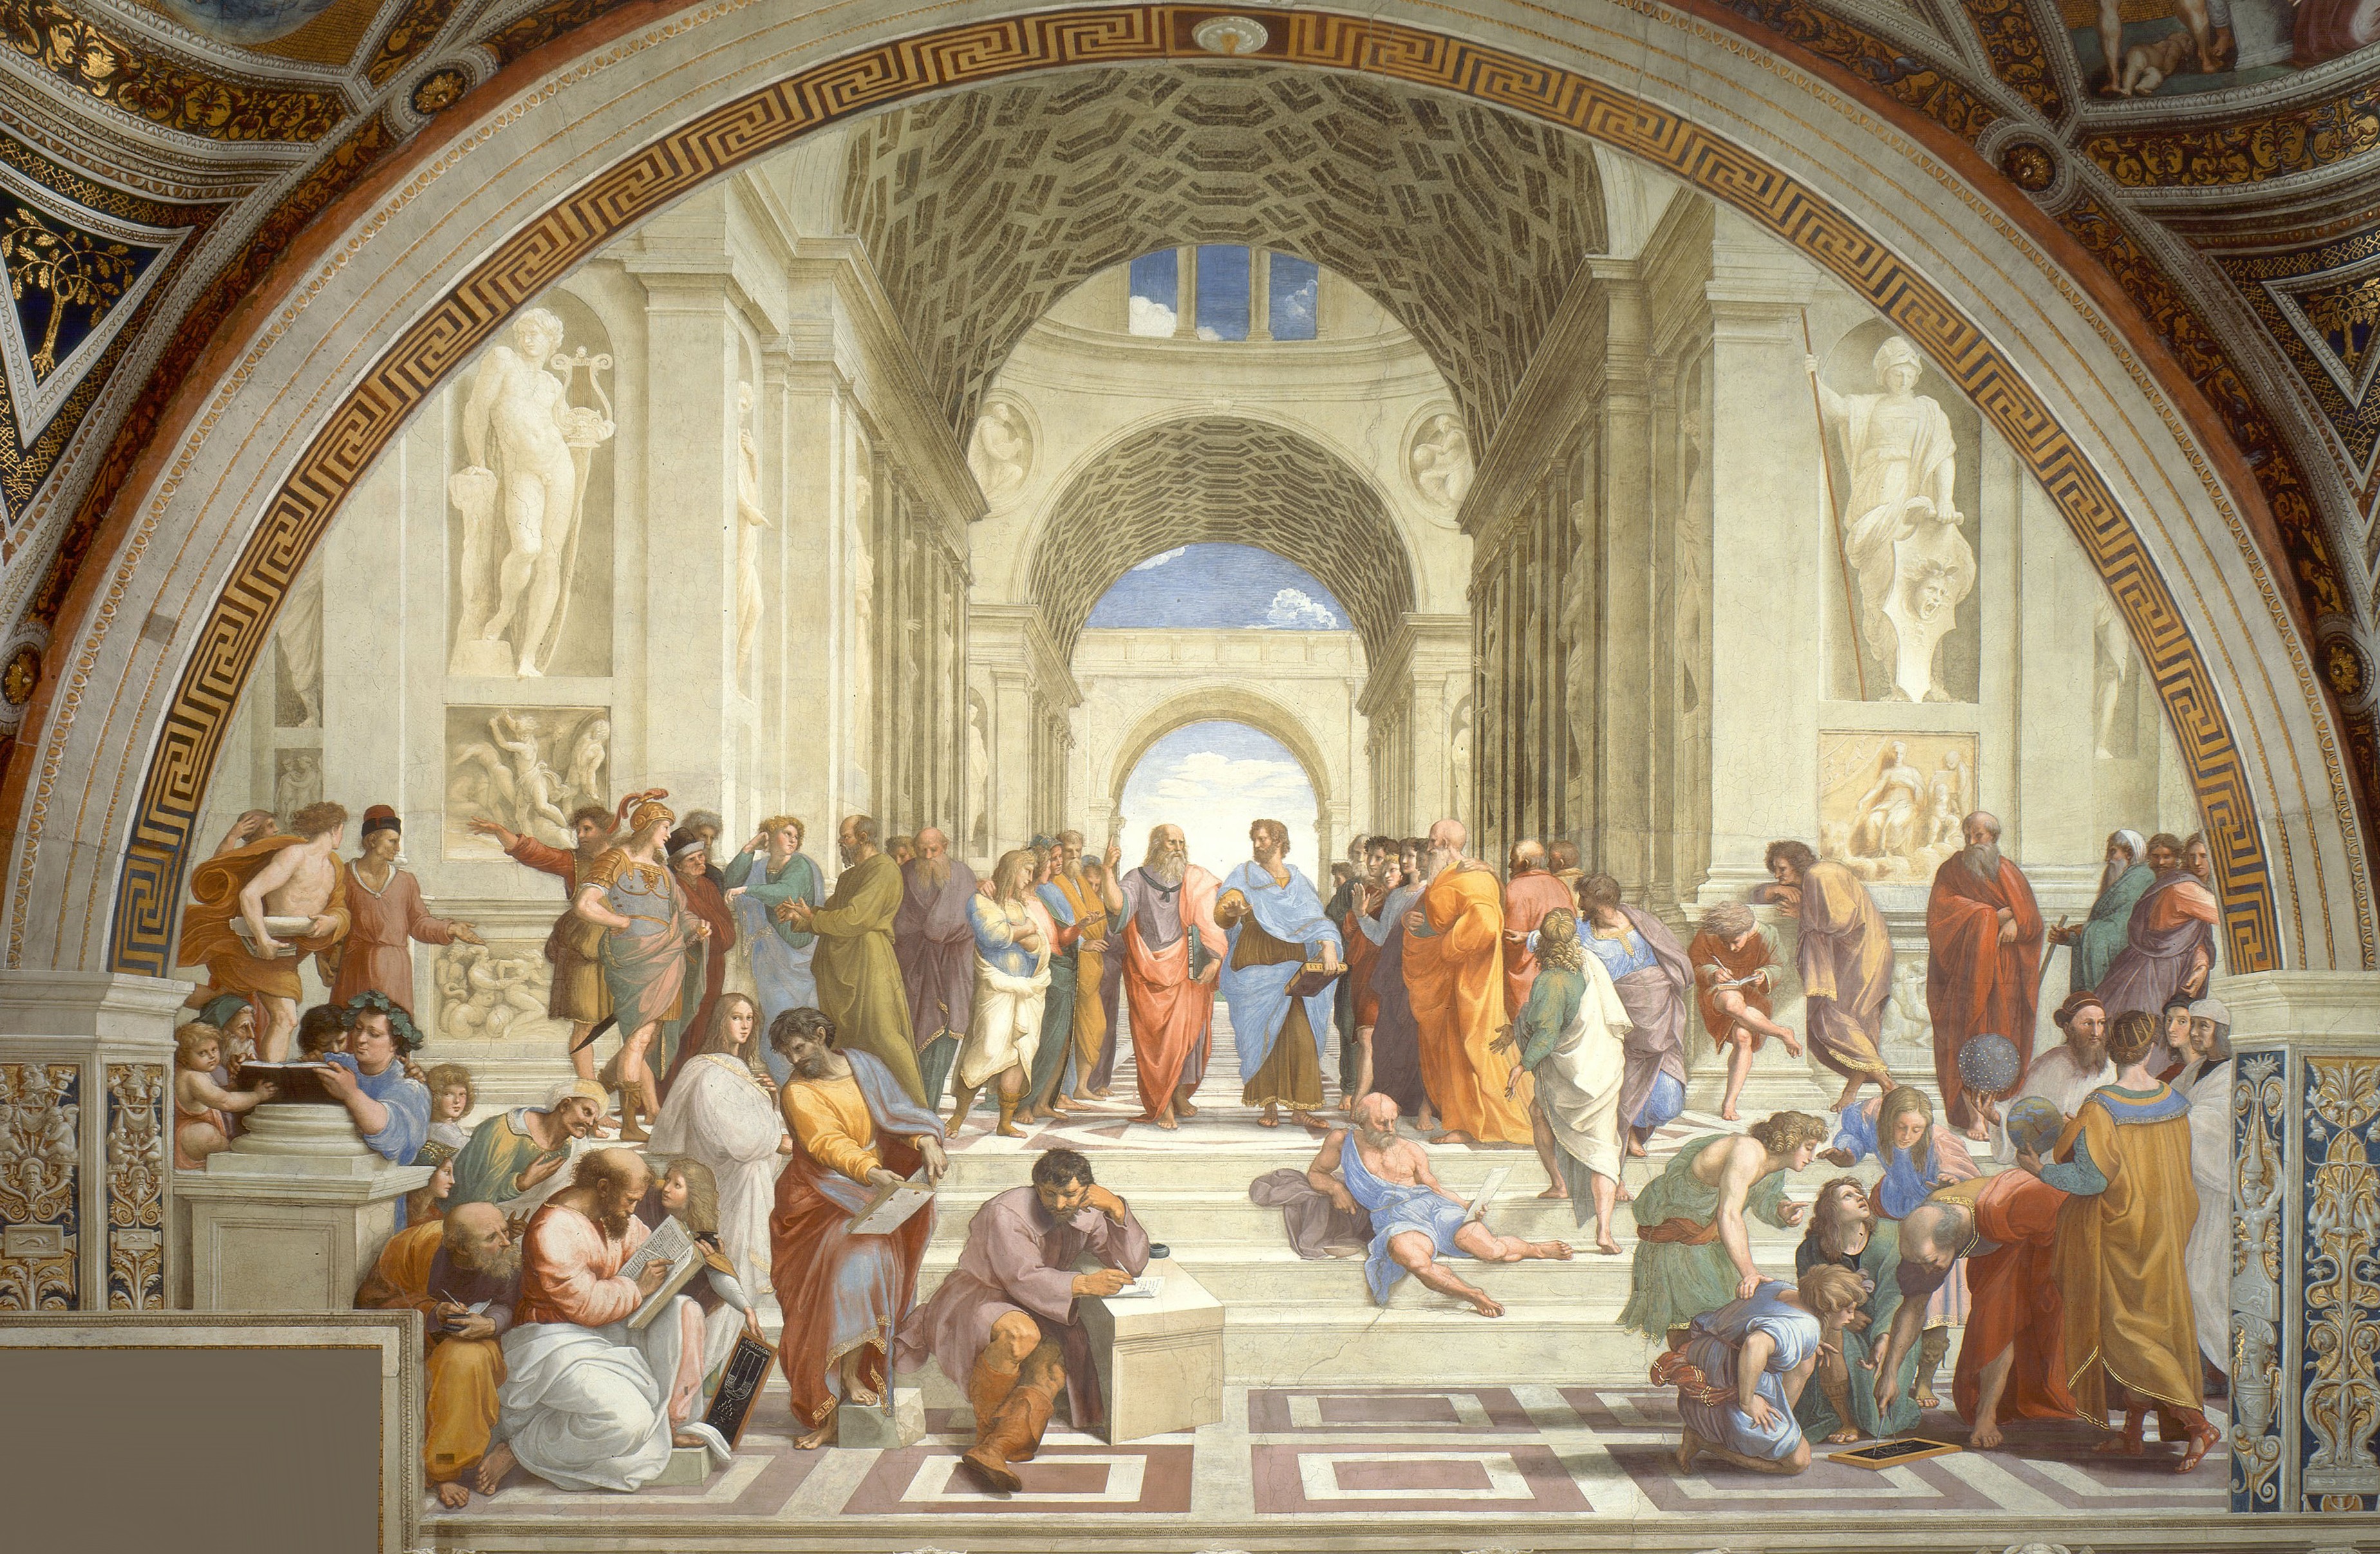 The Concept of Justice in Greek Philosophy (Plato and Aristotle